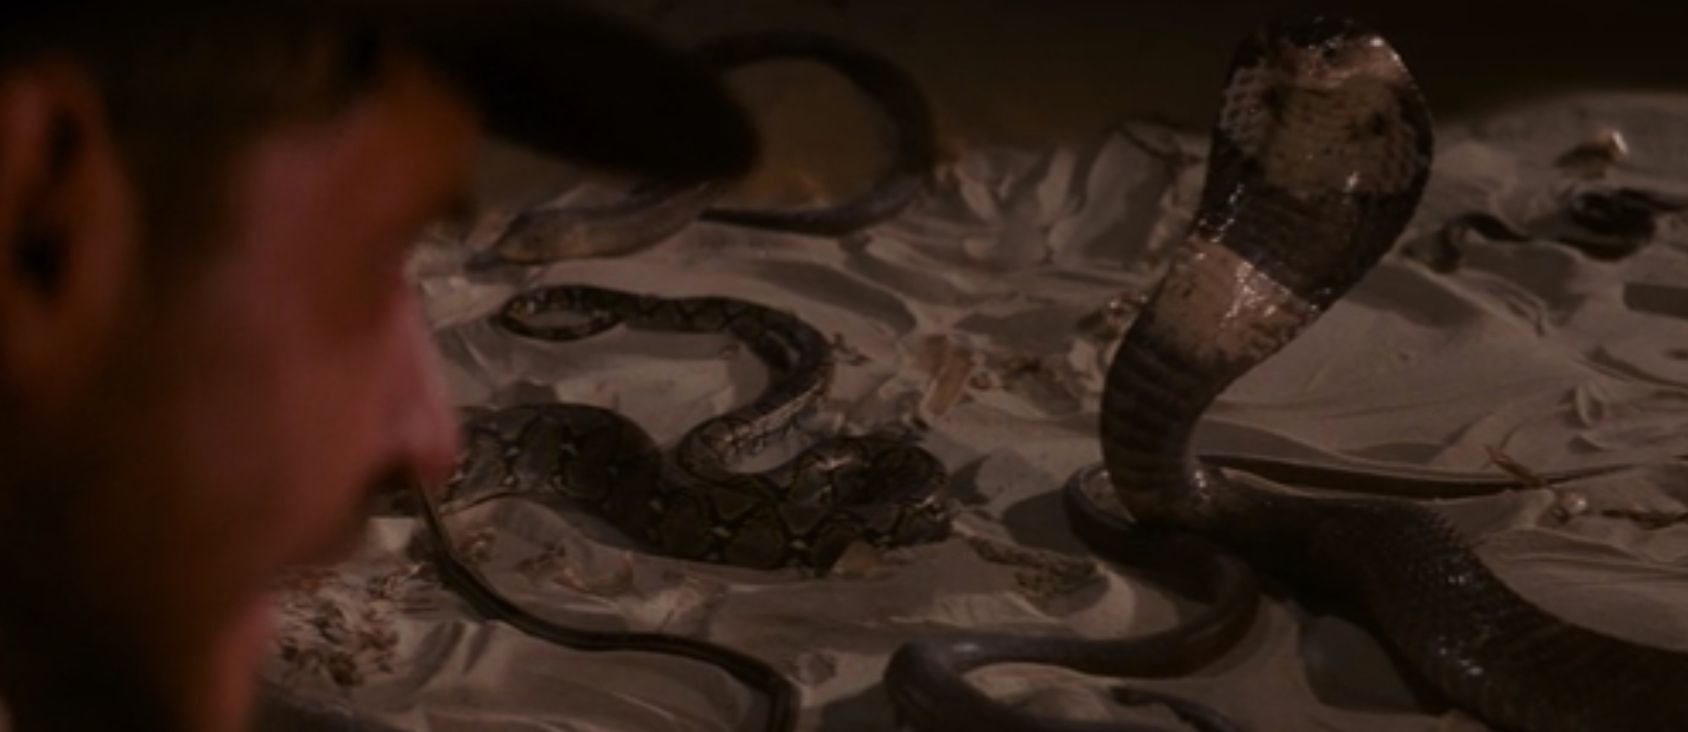 The Cobra In Raiders Of The Lost Ark